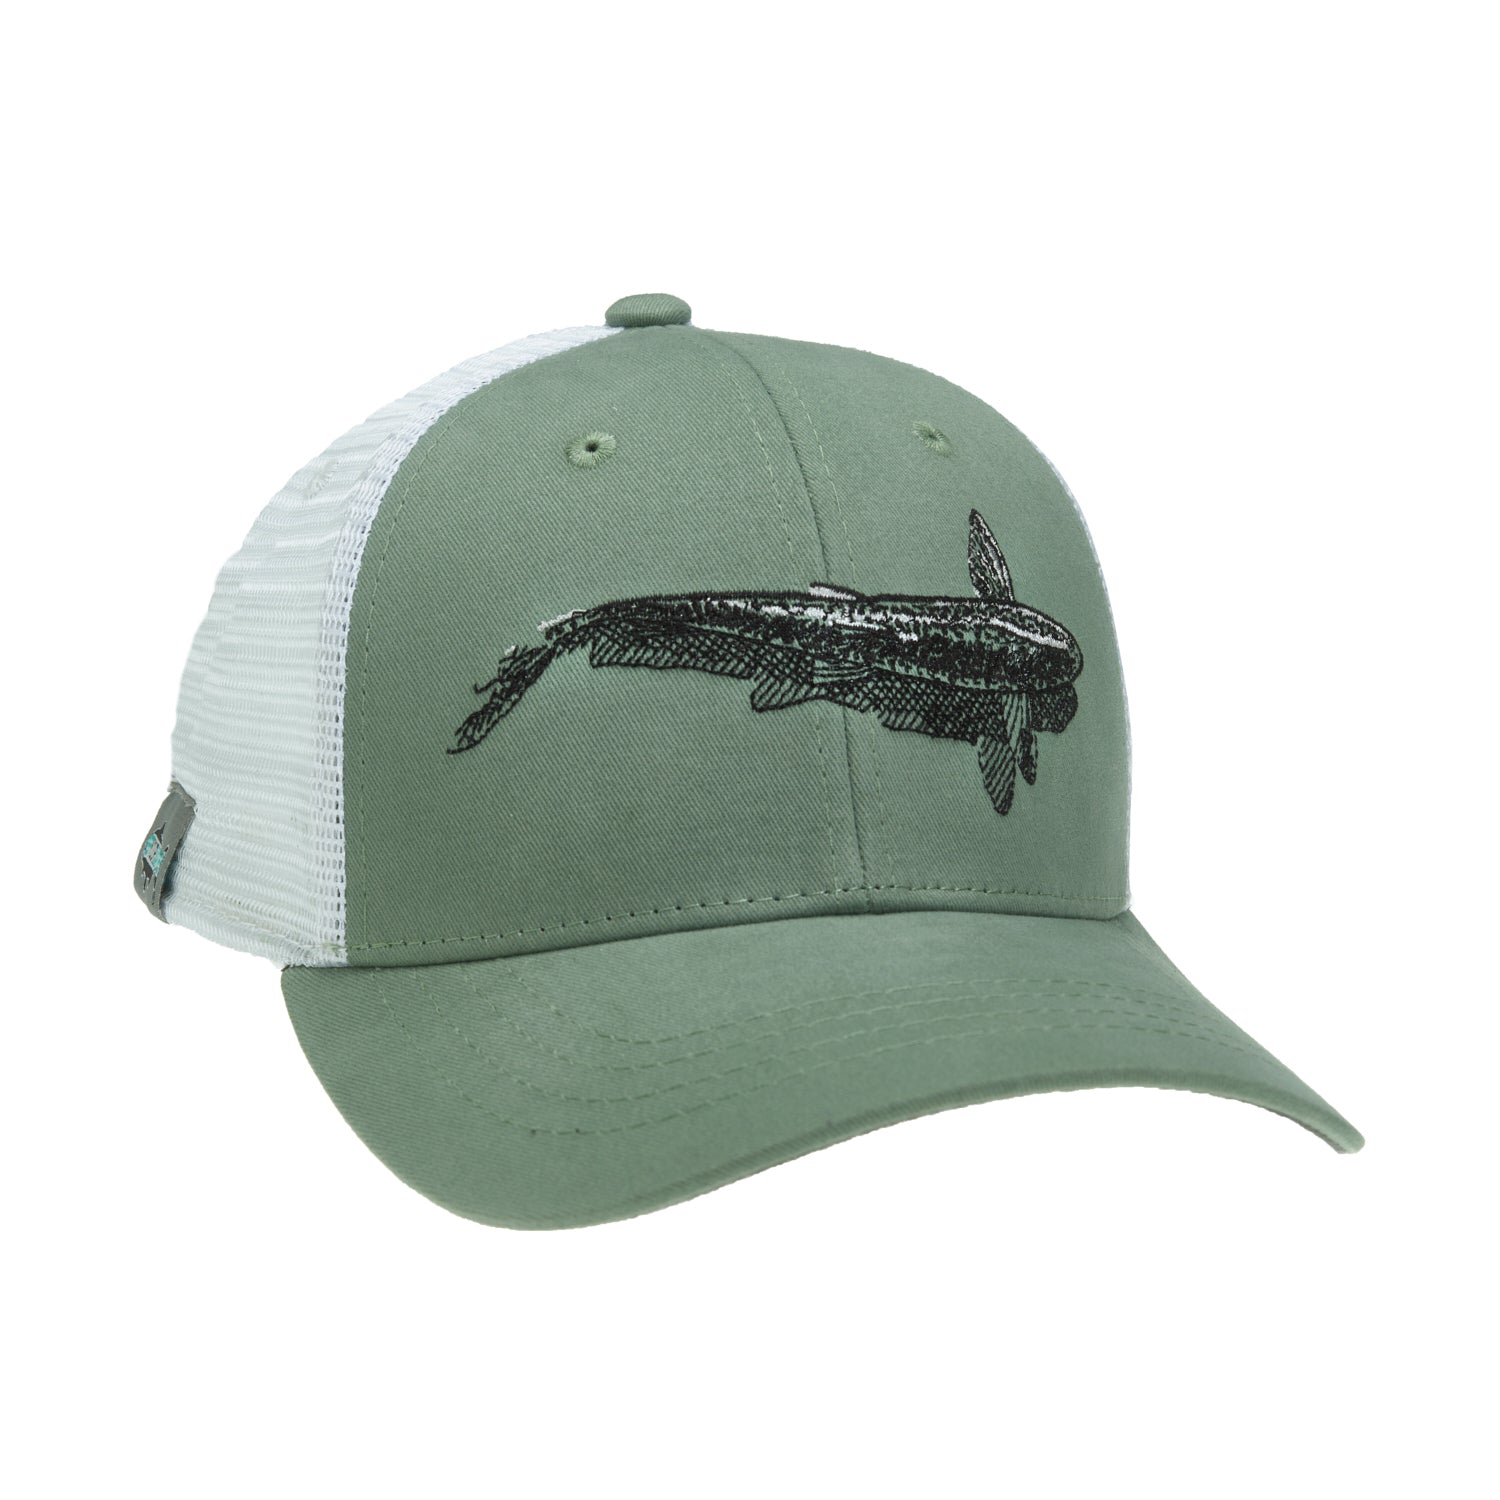 A hat with white mesh in back and green fabric in front has a trout from above and its shadow embroidered on the front